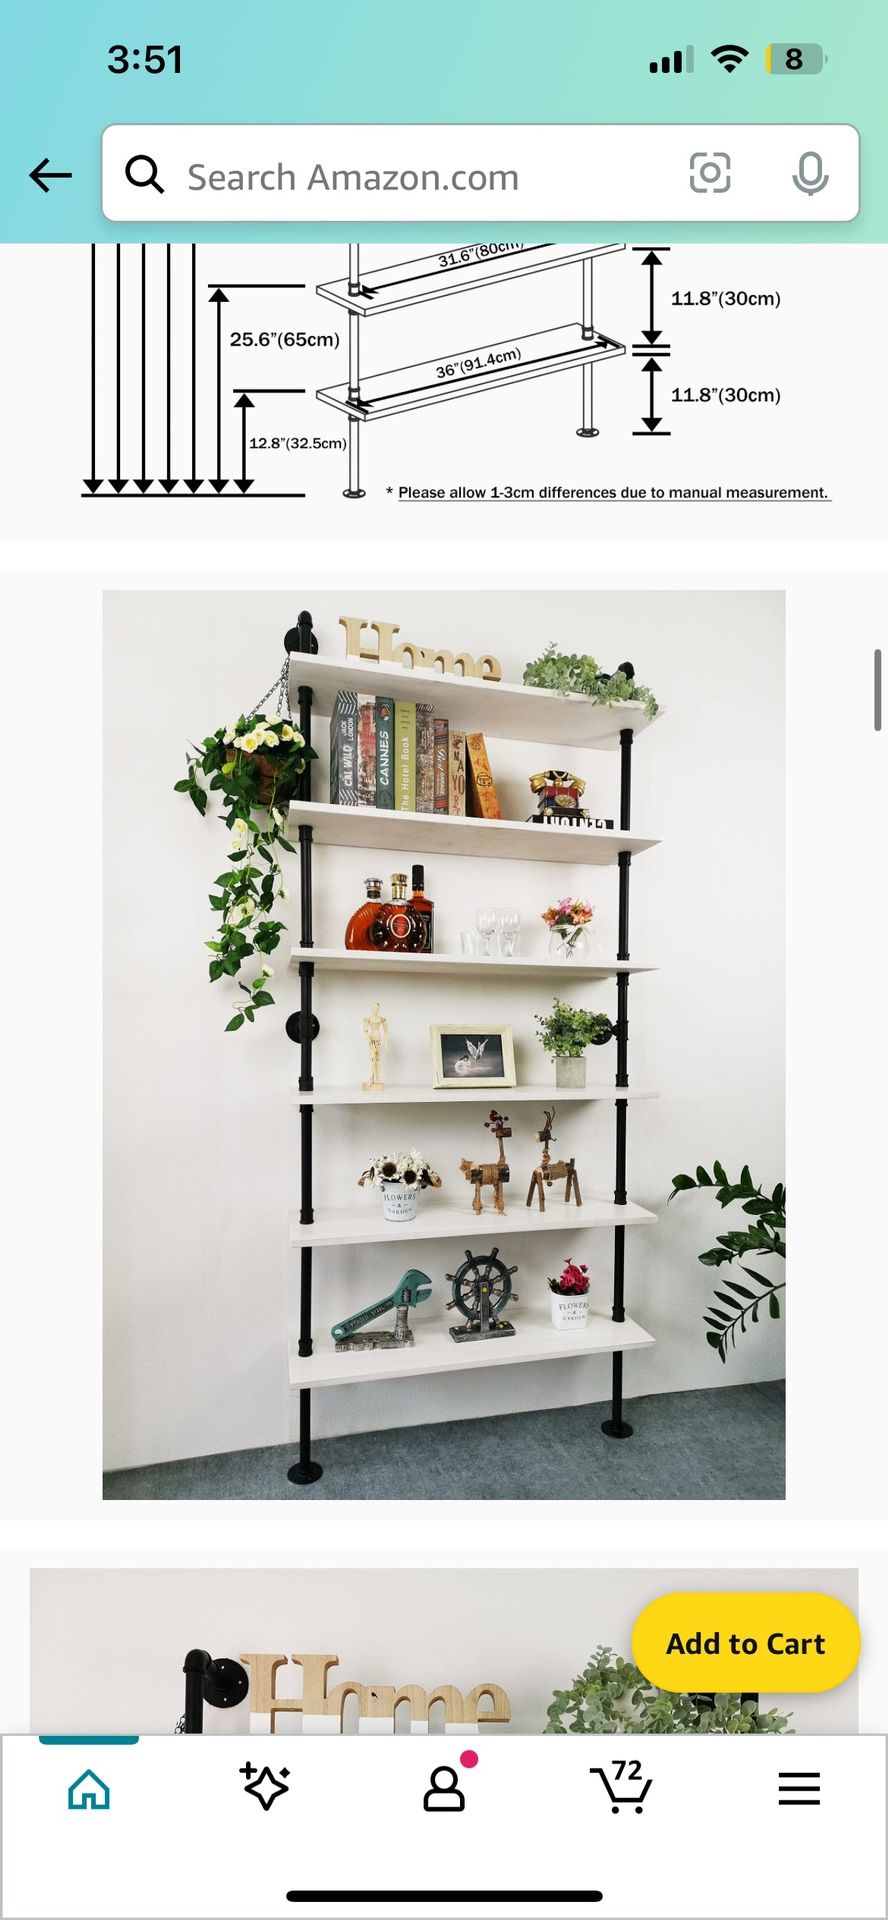 6 Tier Industrial Ladder Shelf Bookcase, Wall Mounted Rustic Bookshelf for Living Room Decor and Storage (White, 6 Tier - 10" D x 36" W x 82.5